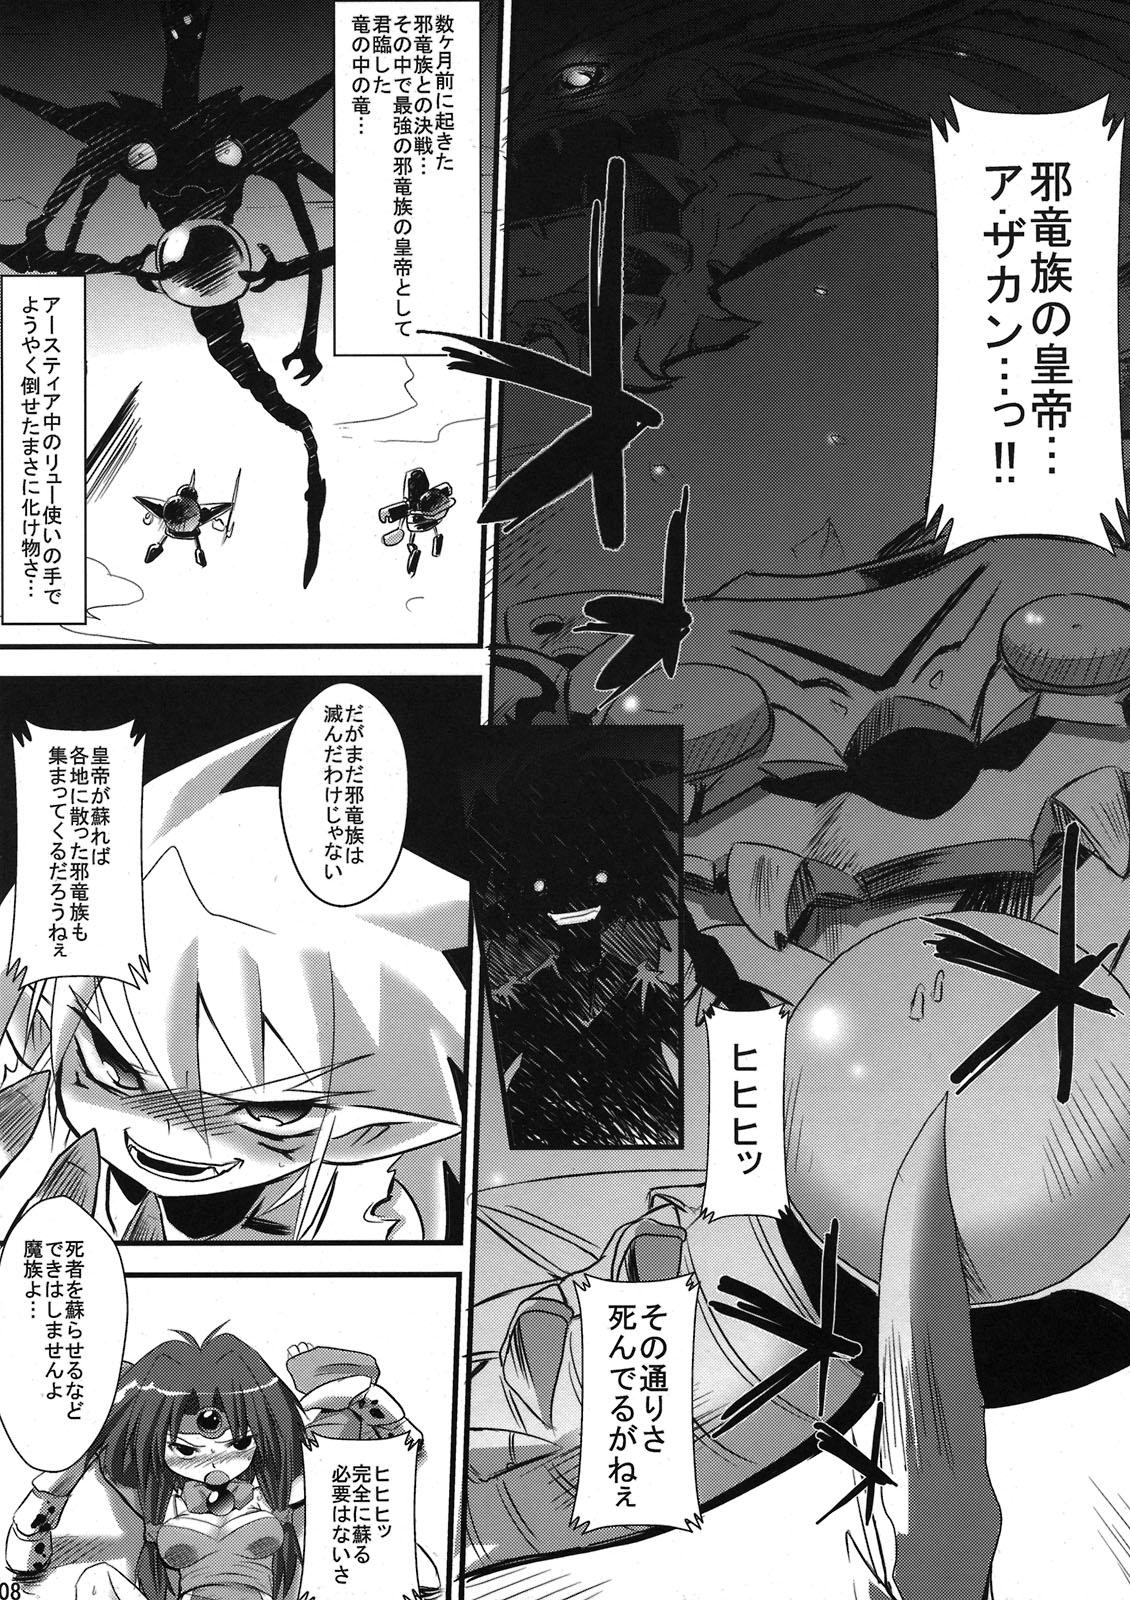 Seduction Porn Toraware no Madouhime Joukan - Lord of lords ryu knight Masterbate - Page 8